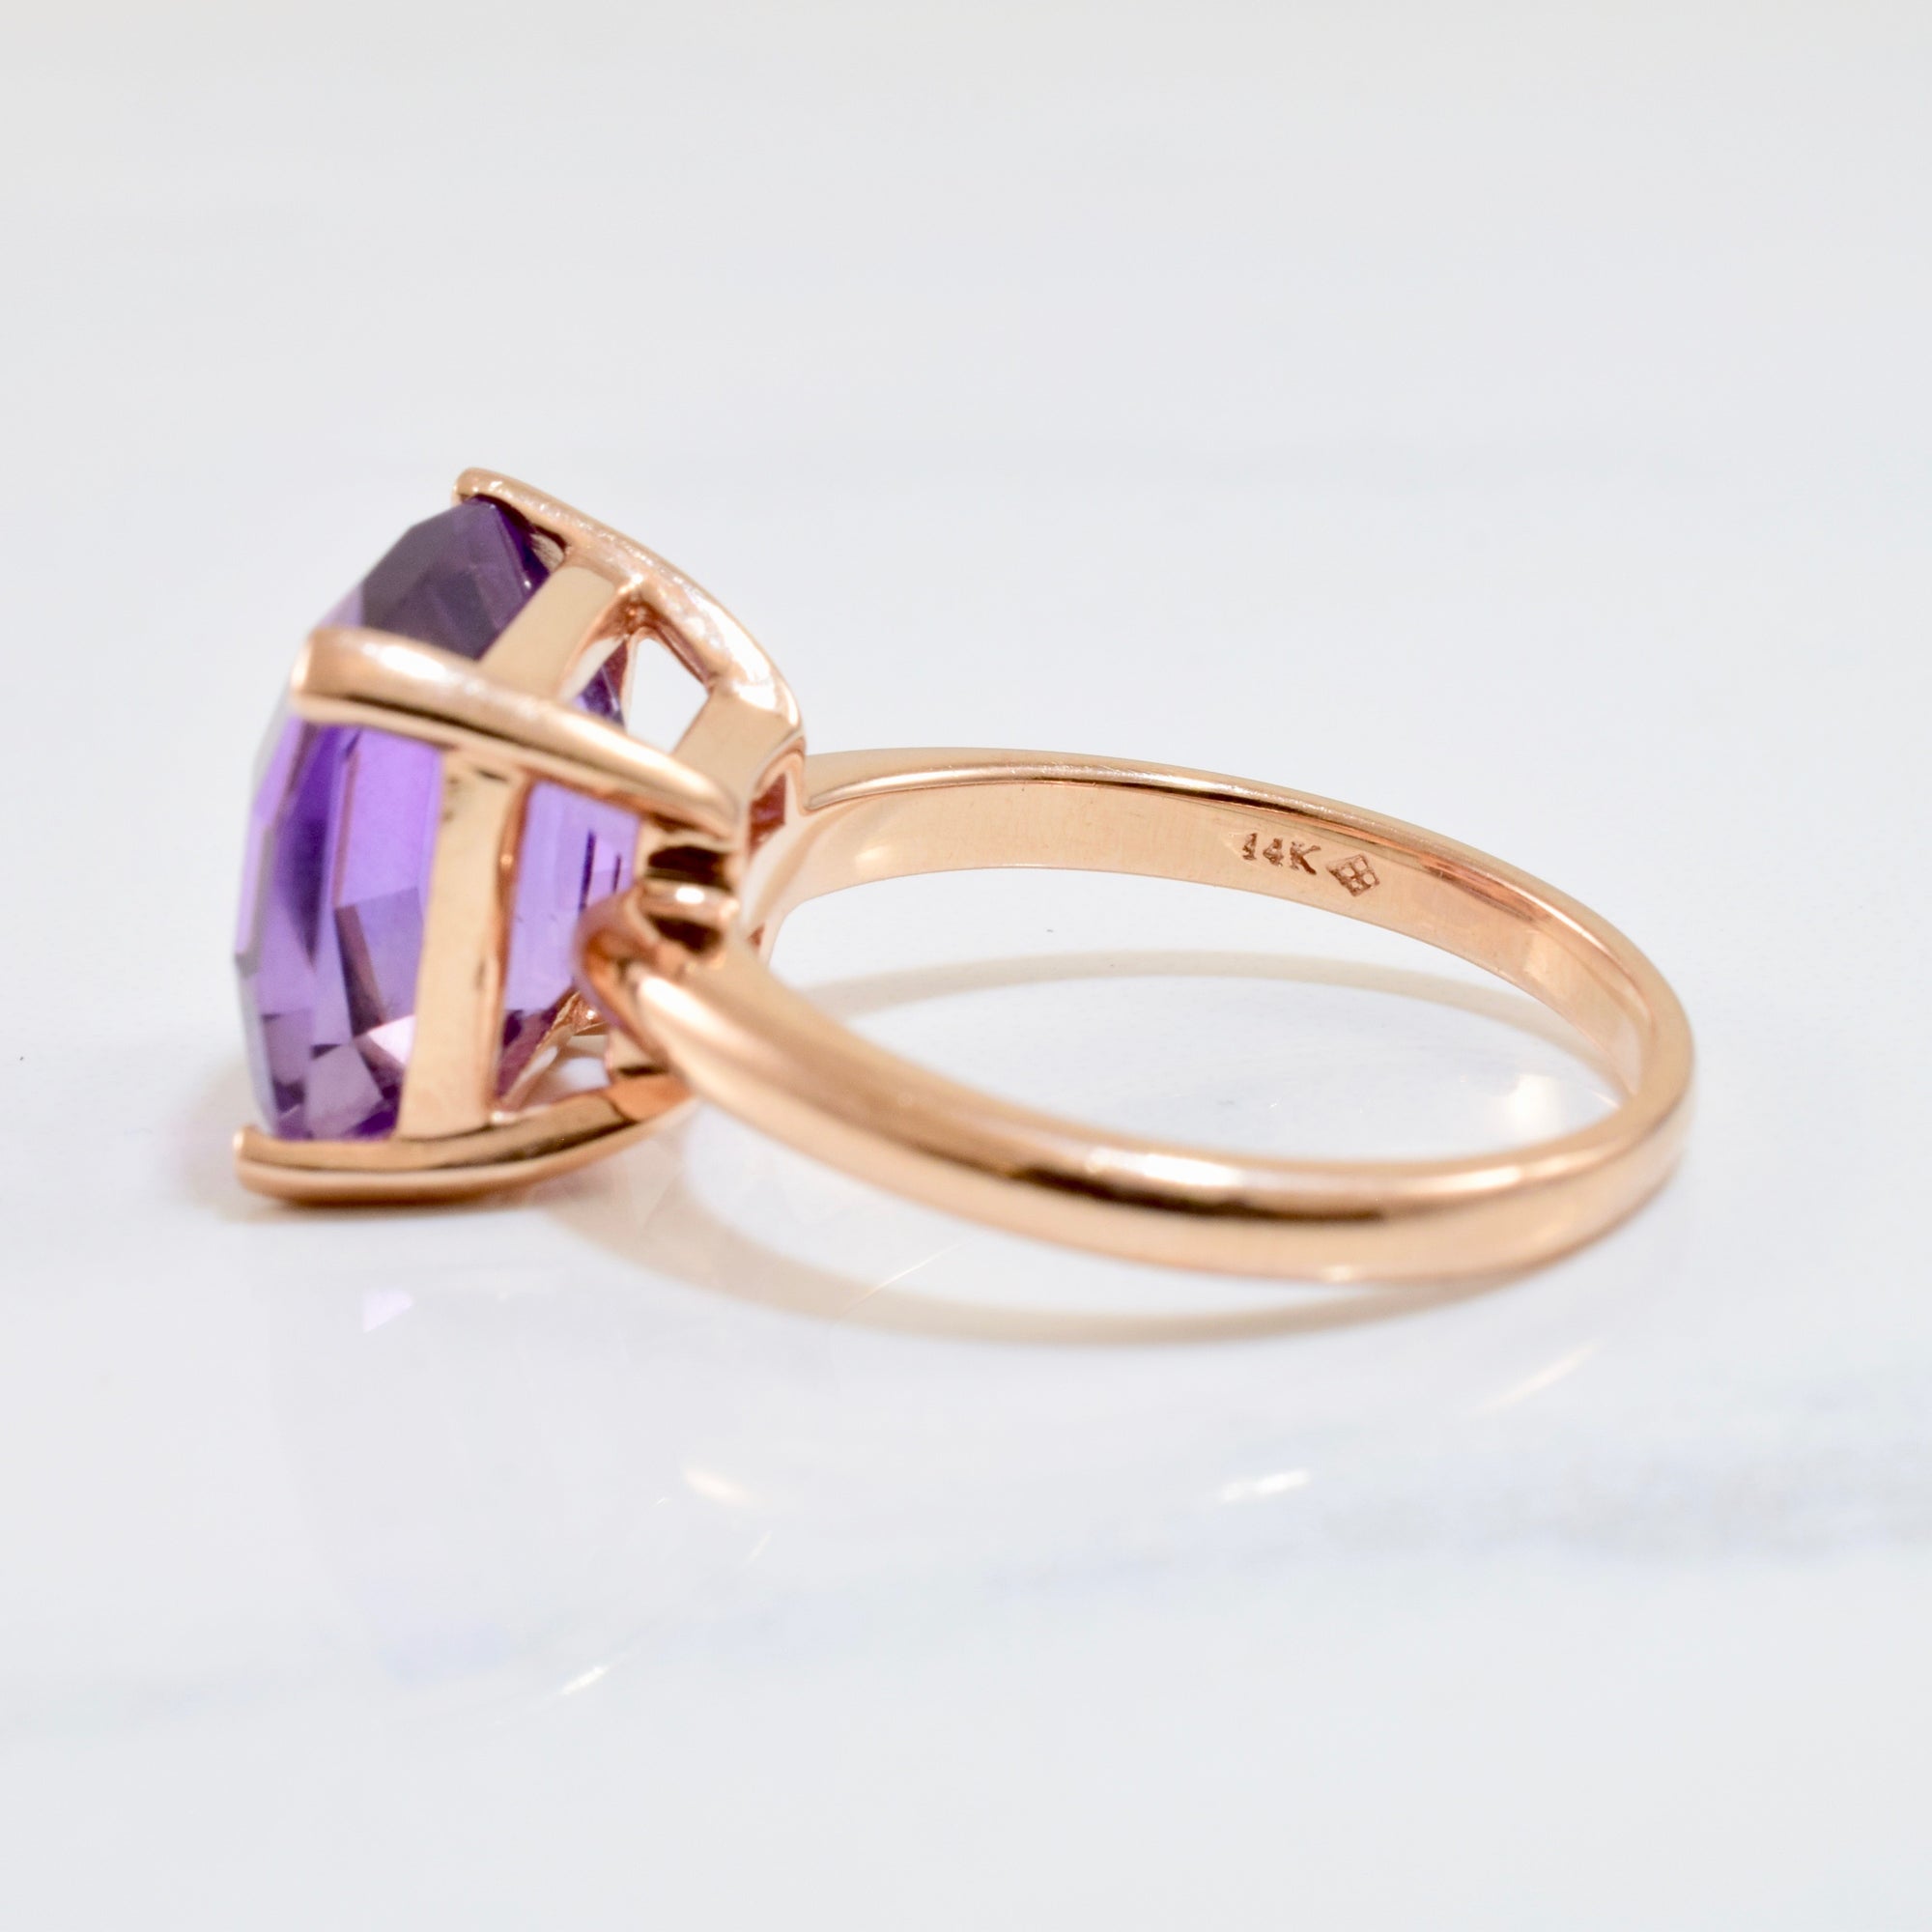 Solitaire Amethyst Ring | SZ 7 |